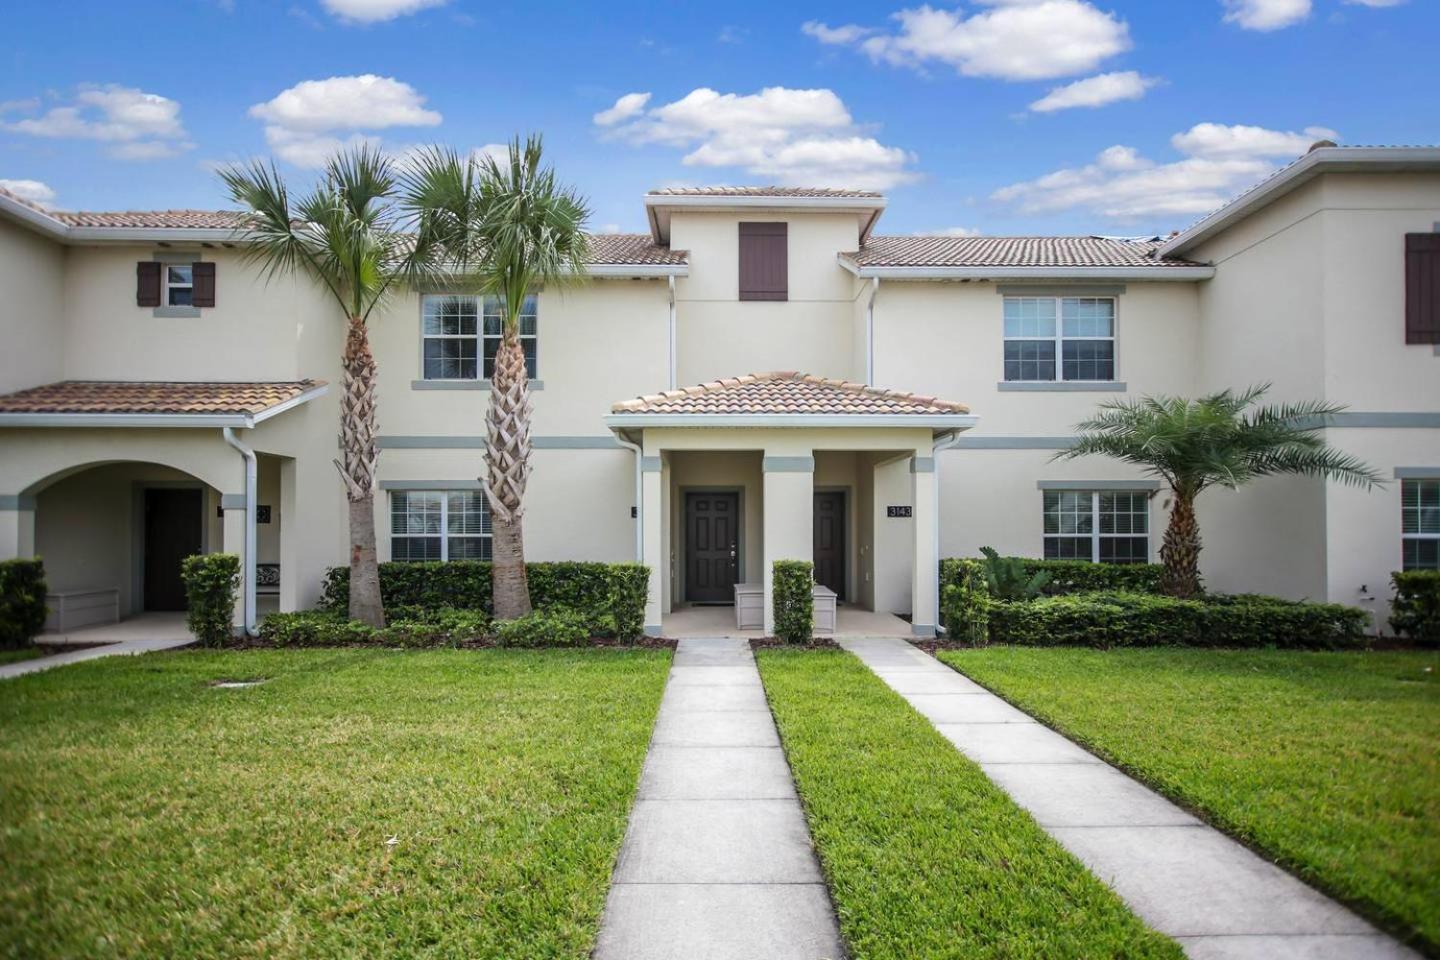 F - New 4 Bedroom Home - 5 Miles To Disney - Free Water Park - Private Pool Kissimmee Exterior photo